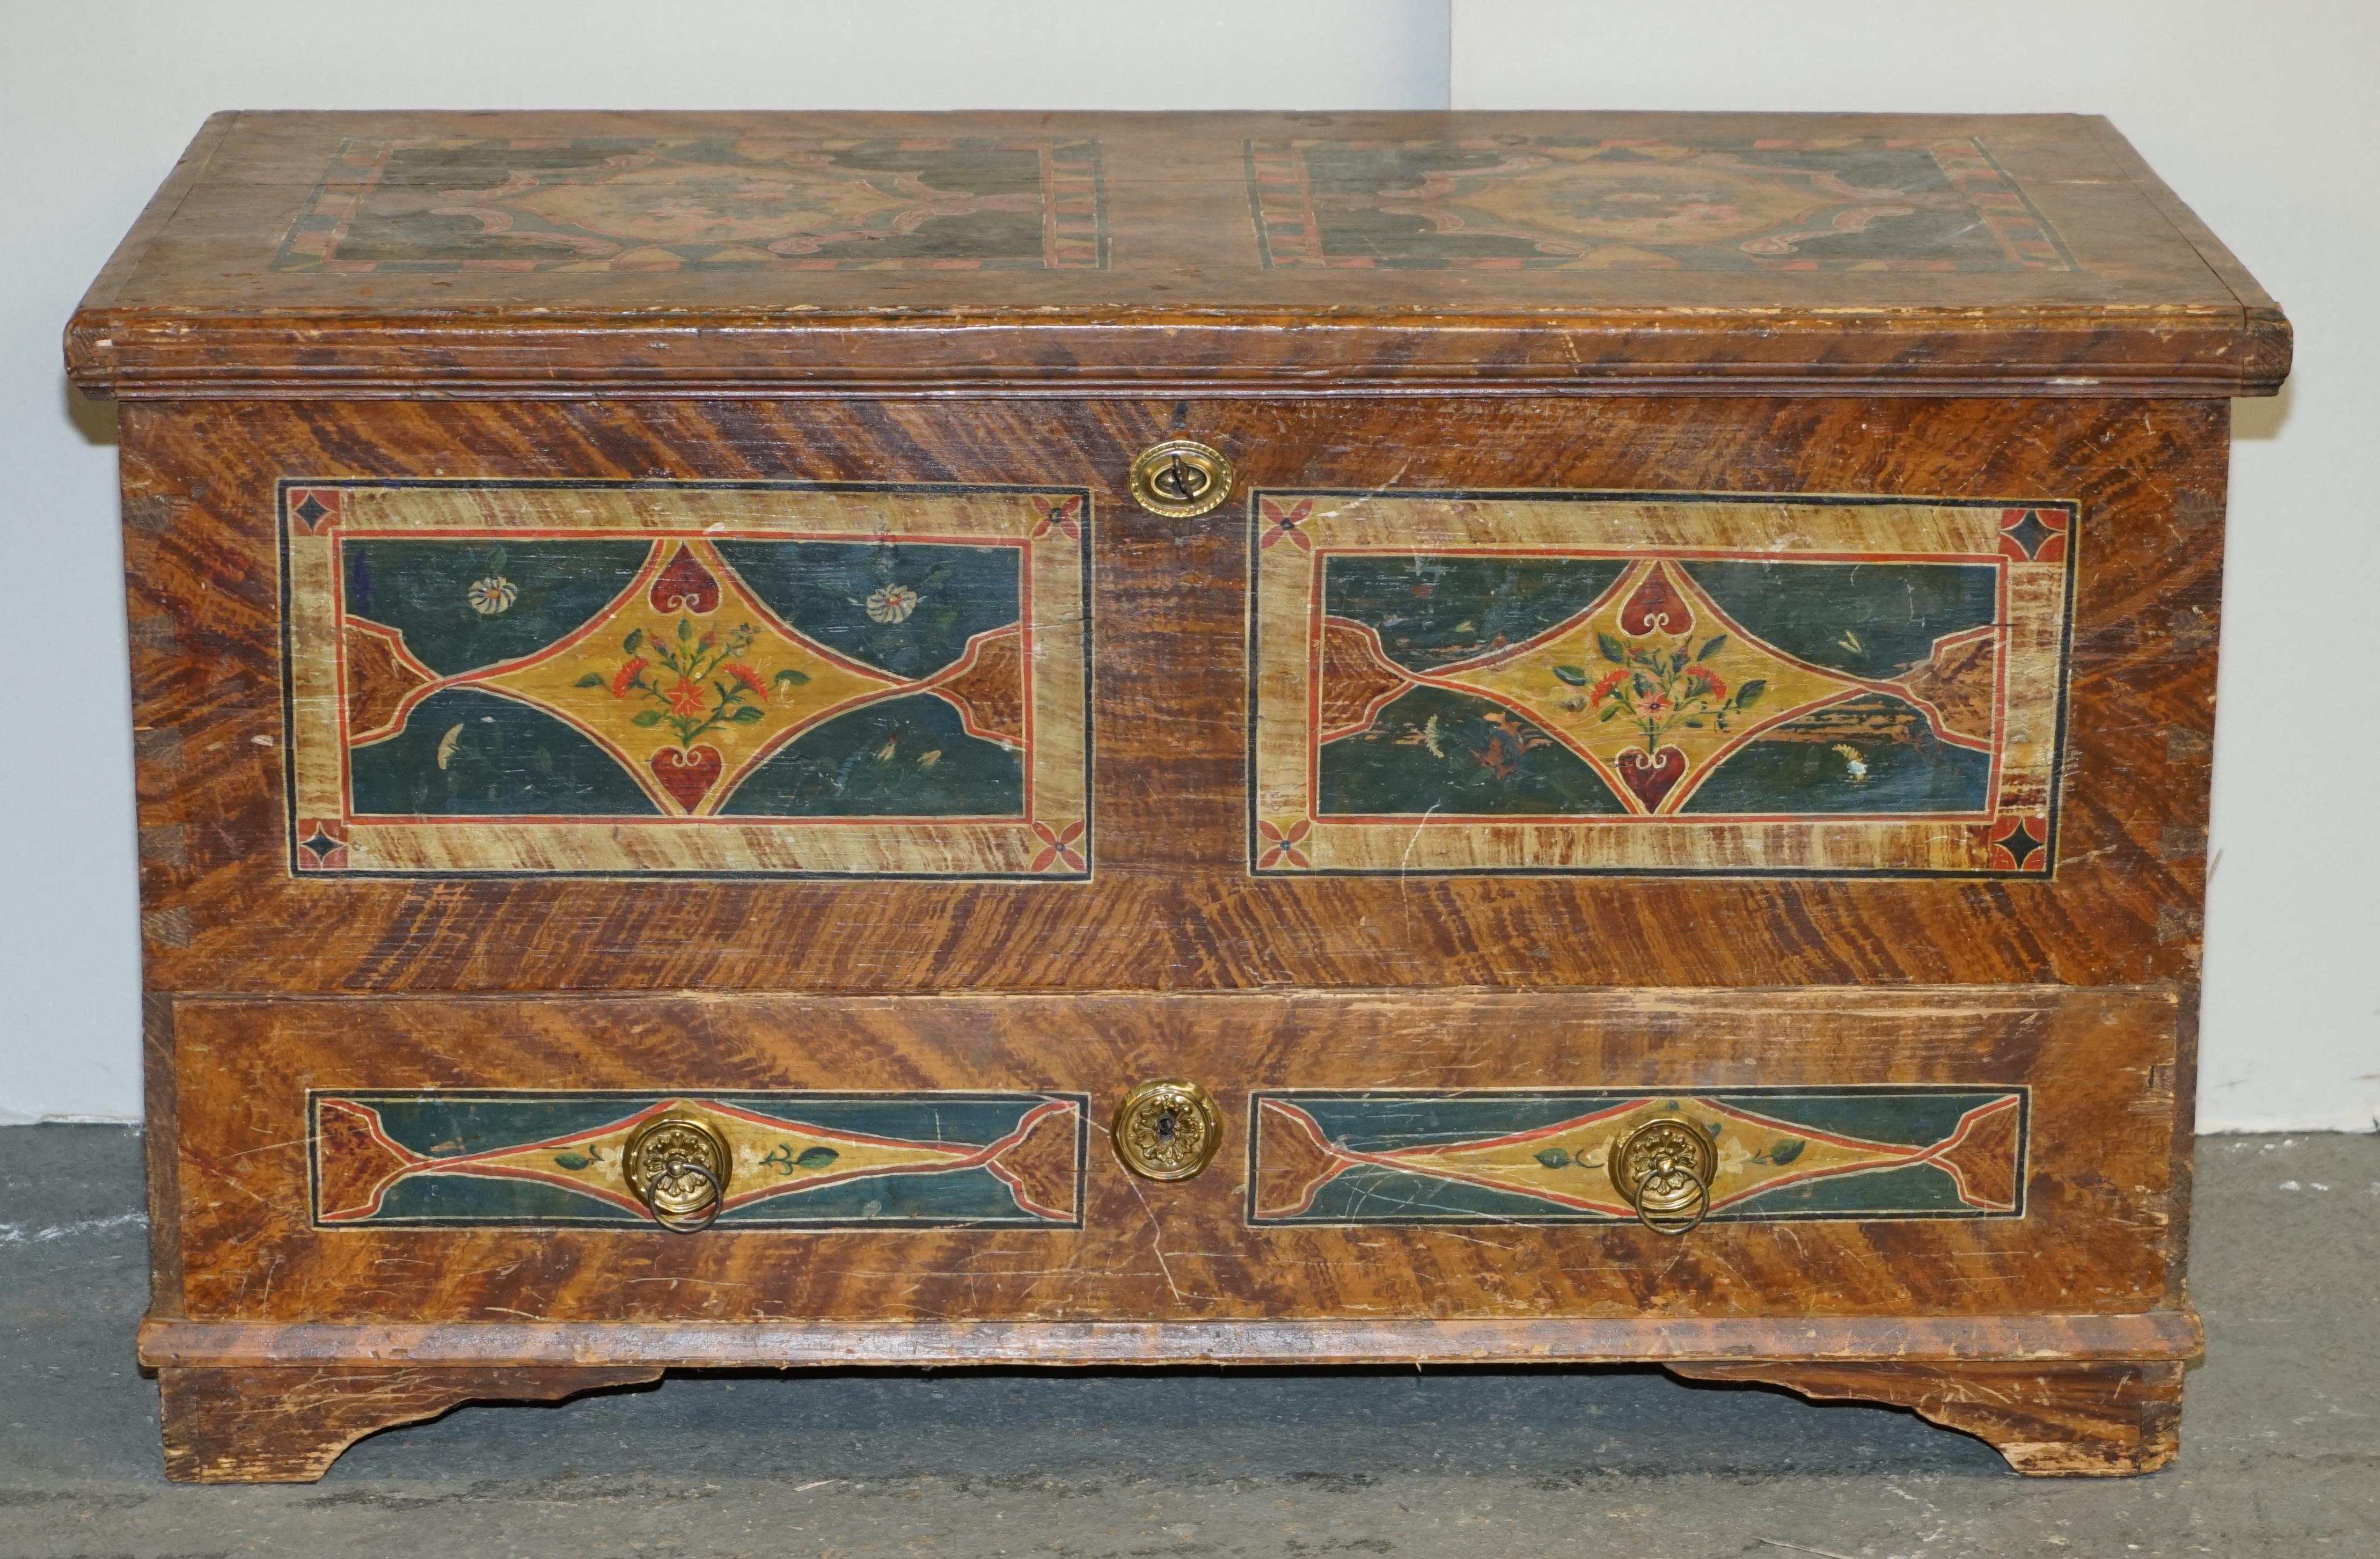 We are delighted to offer for sale this stunning, extra large circa 1875 hand painted Romanian clothes trunk or marriage coffer chest with rare base drawer

I have recently purchased a very large collection of these original, antique painted